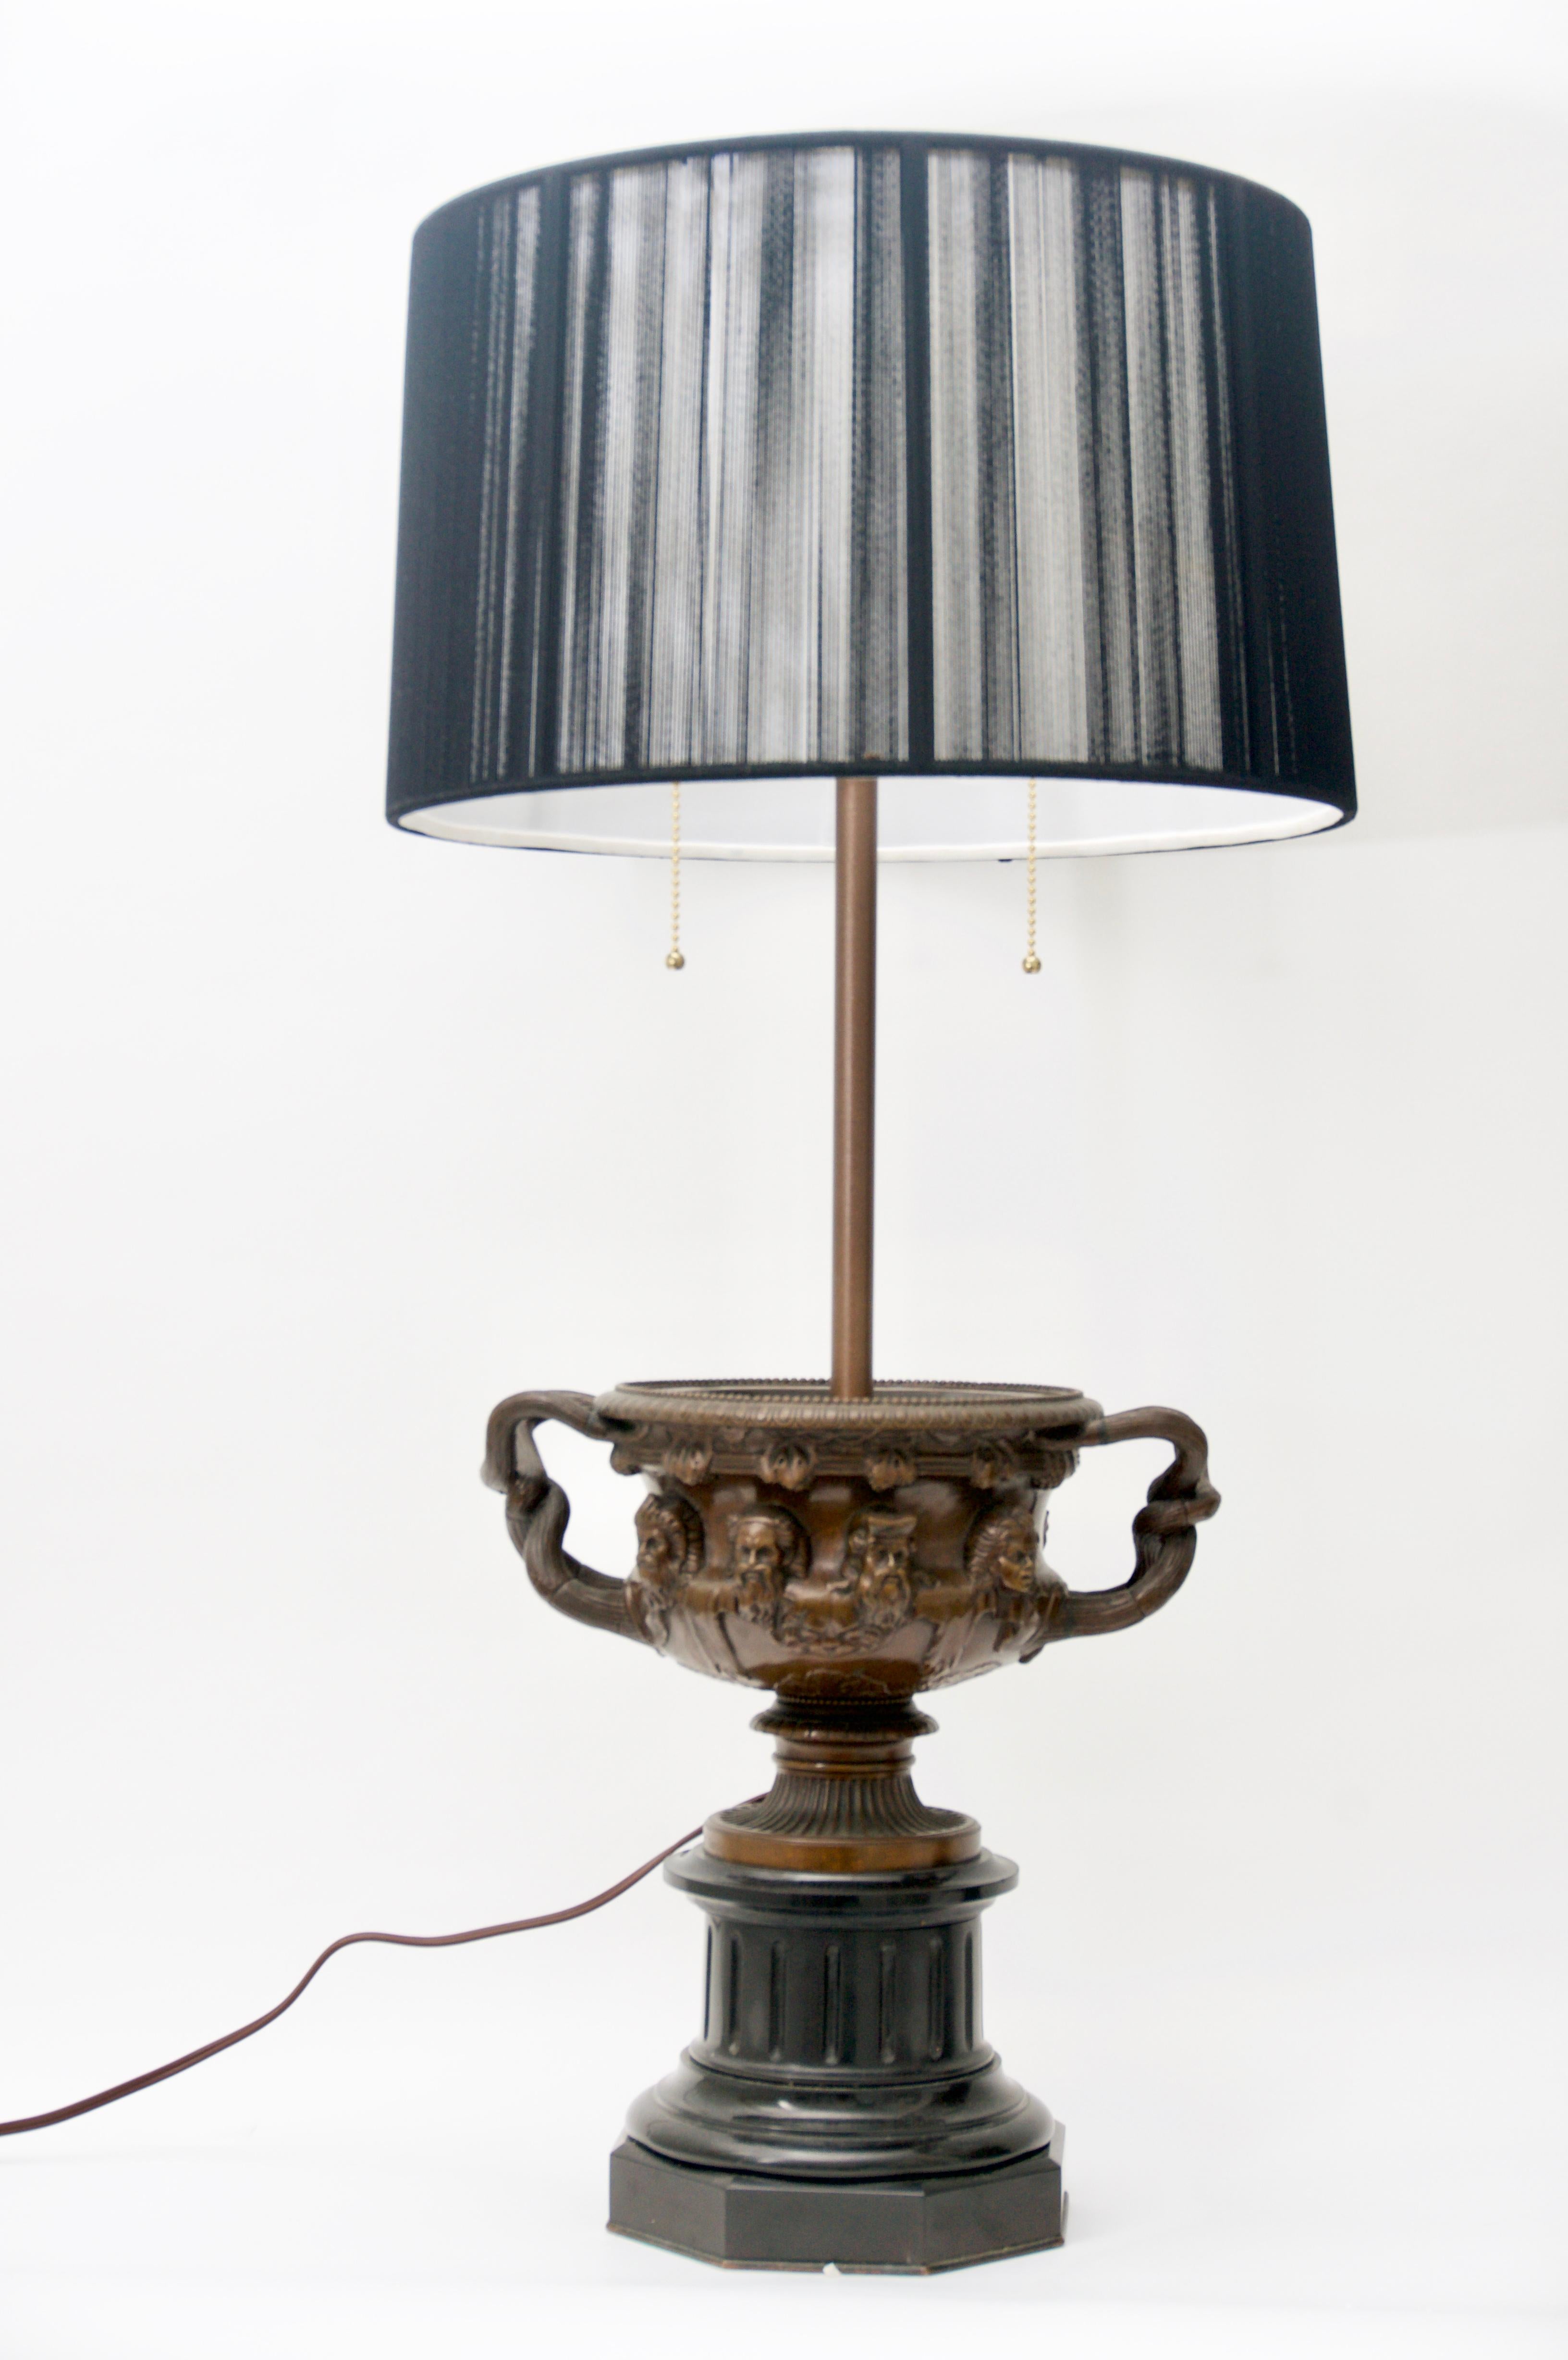 This pair of table lamps were recently acquired from a Palm Beach estate and they date to the late 19th century and were fabricated by the F. Barbedienne Foundry in Italy.

Note: Lamp shades are not included in the price and can be purchased